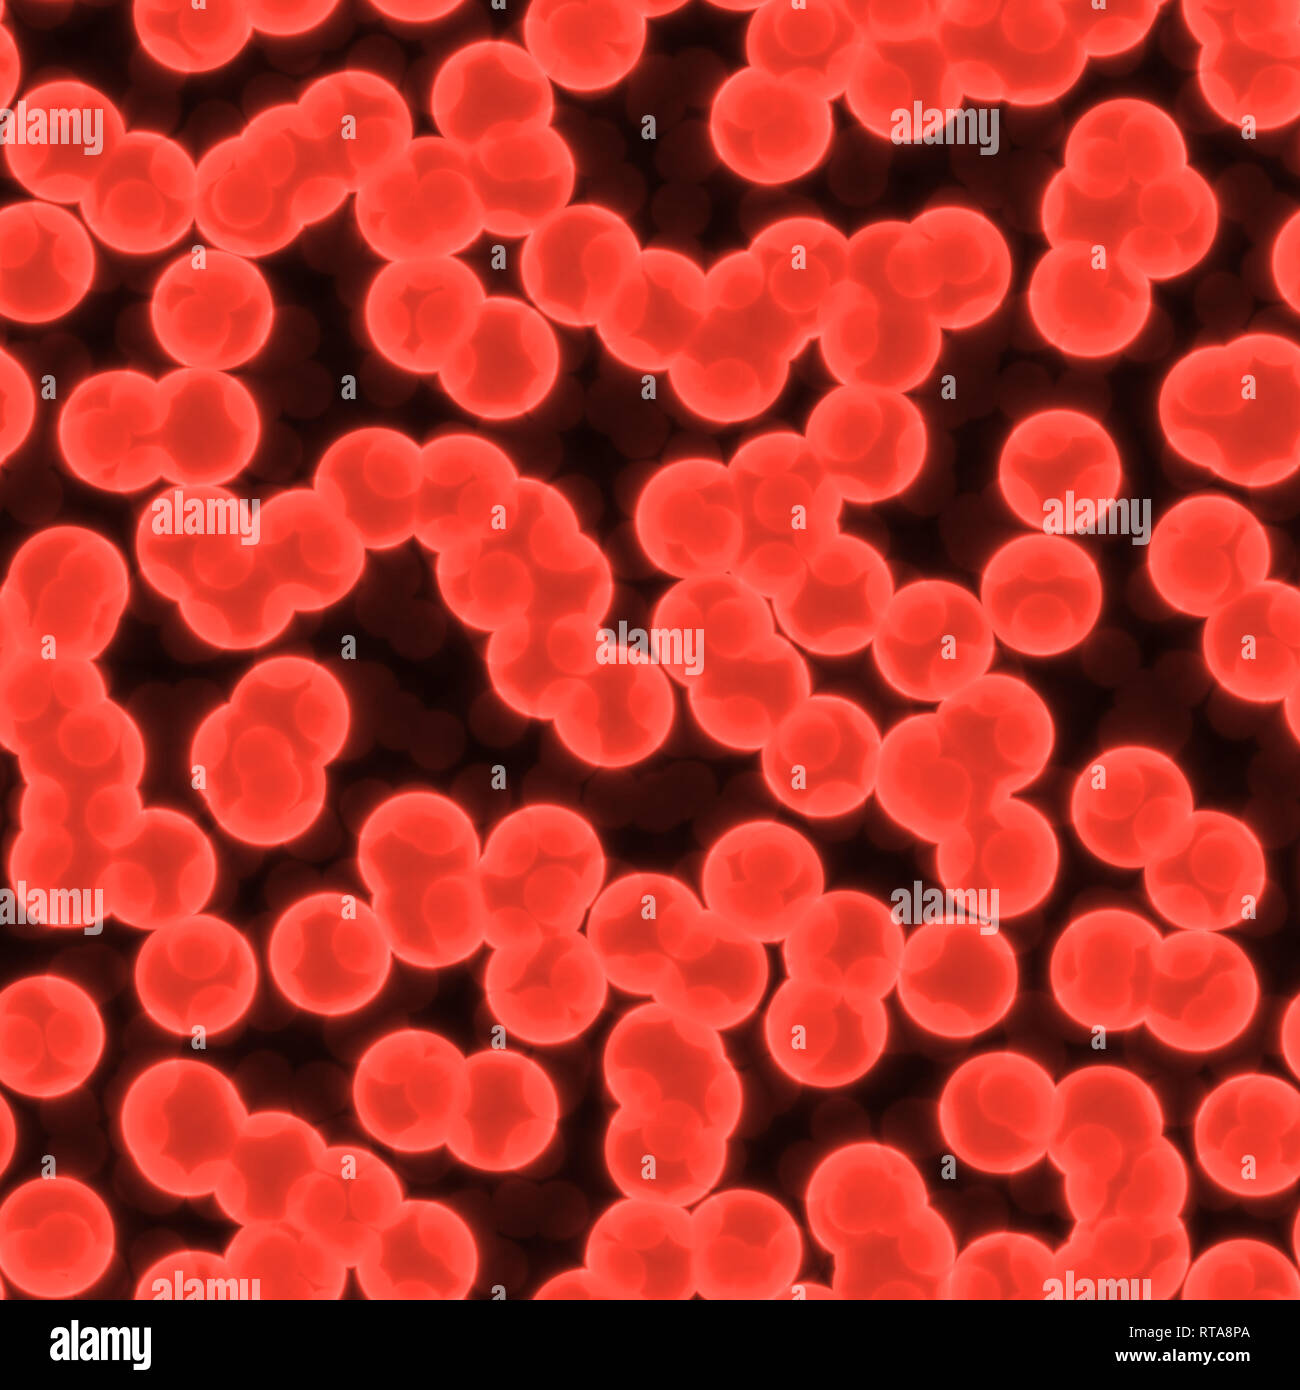 Abstract illustration of red blood cells seamless pattern Stock Photo